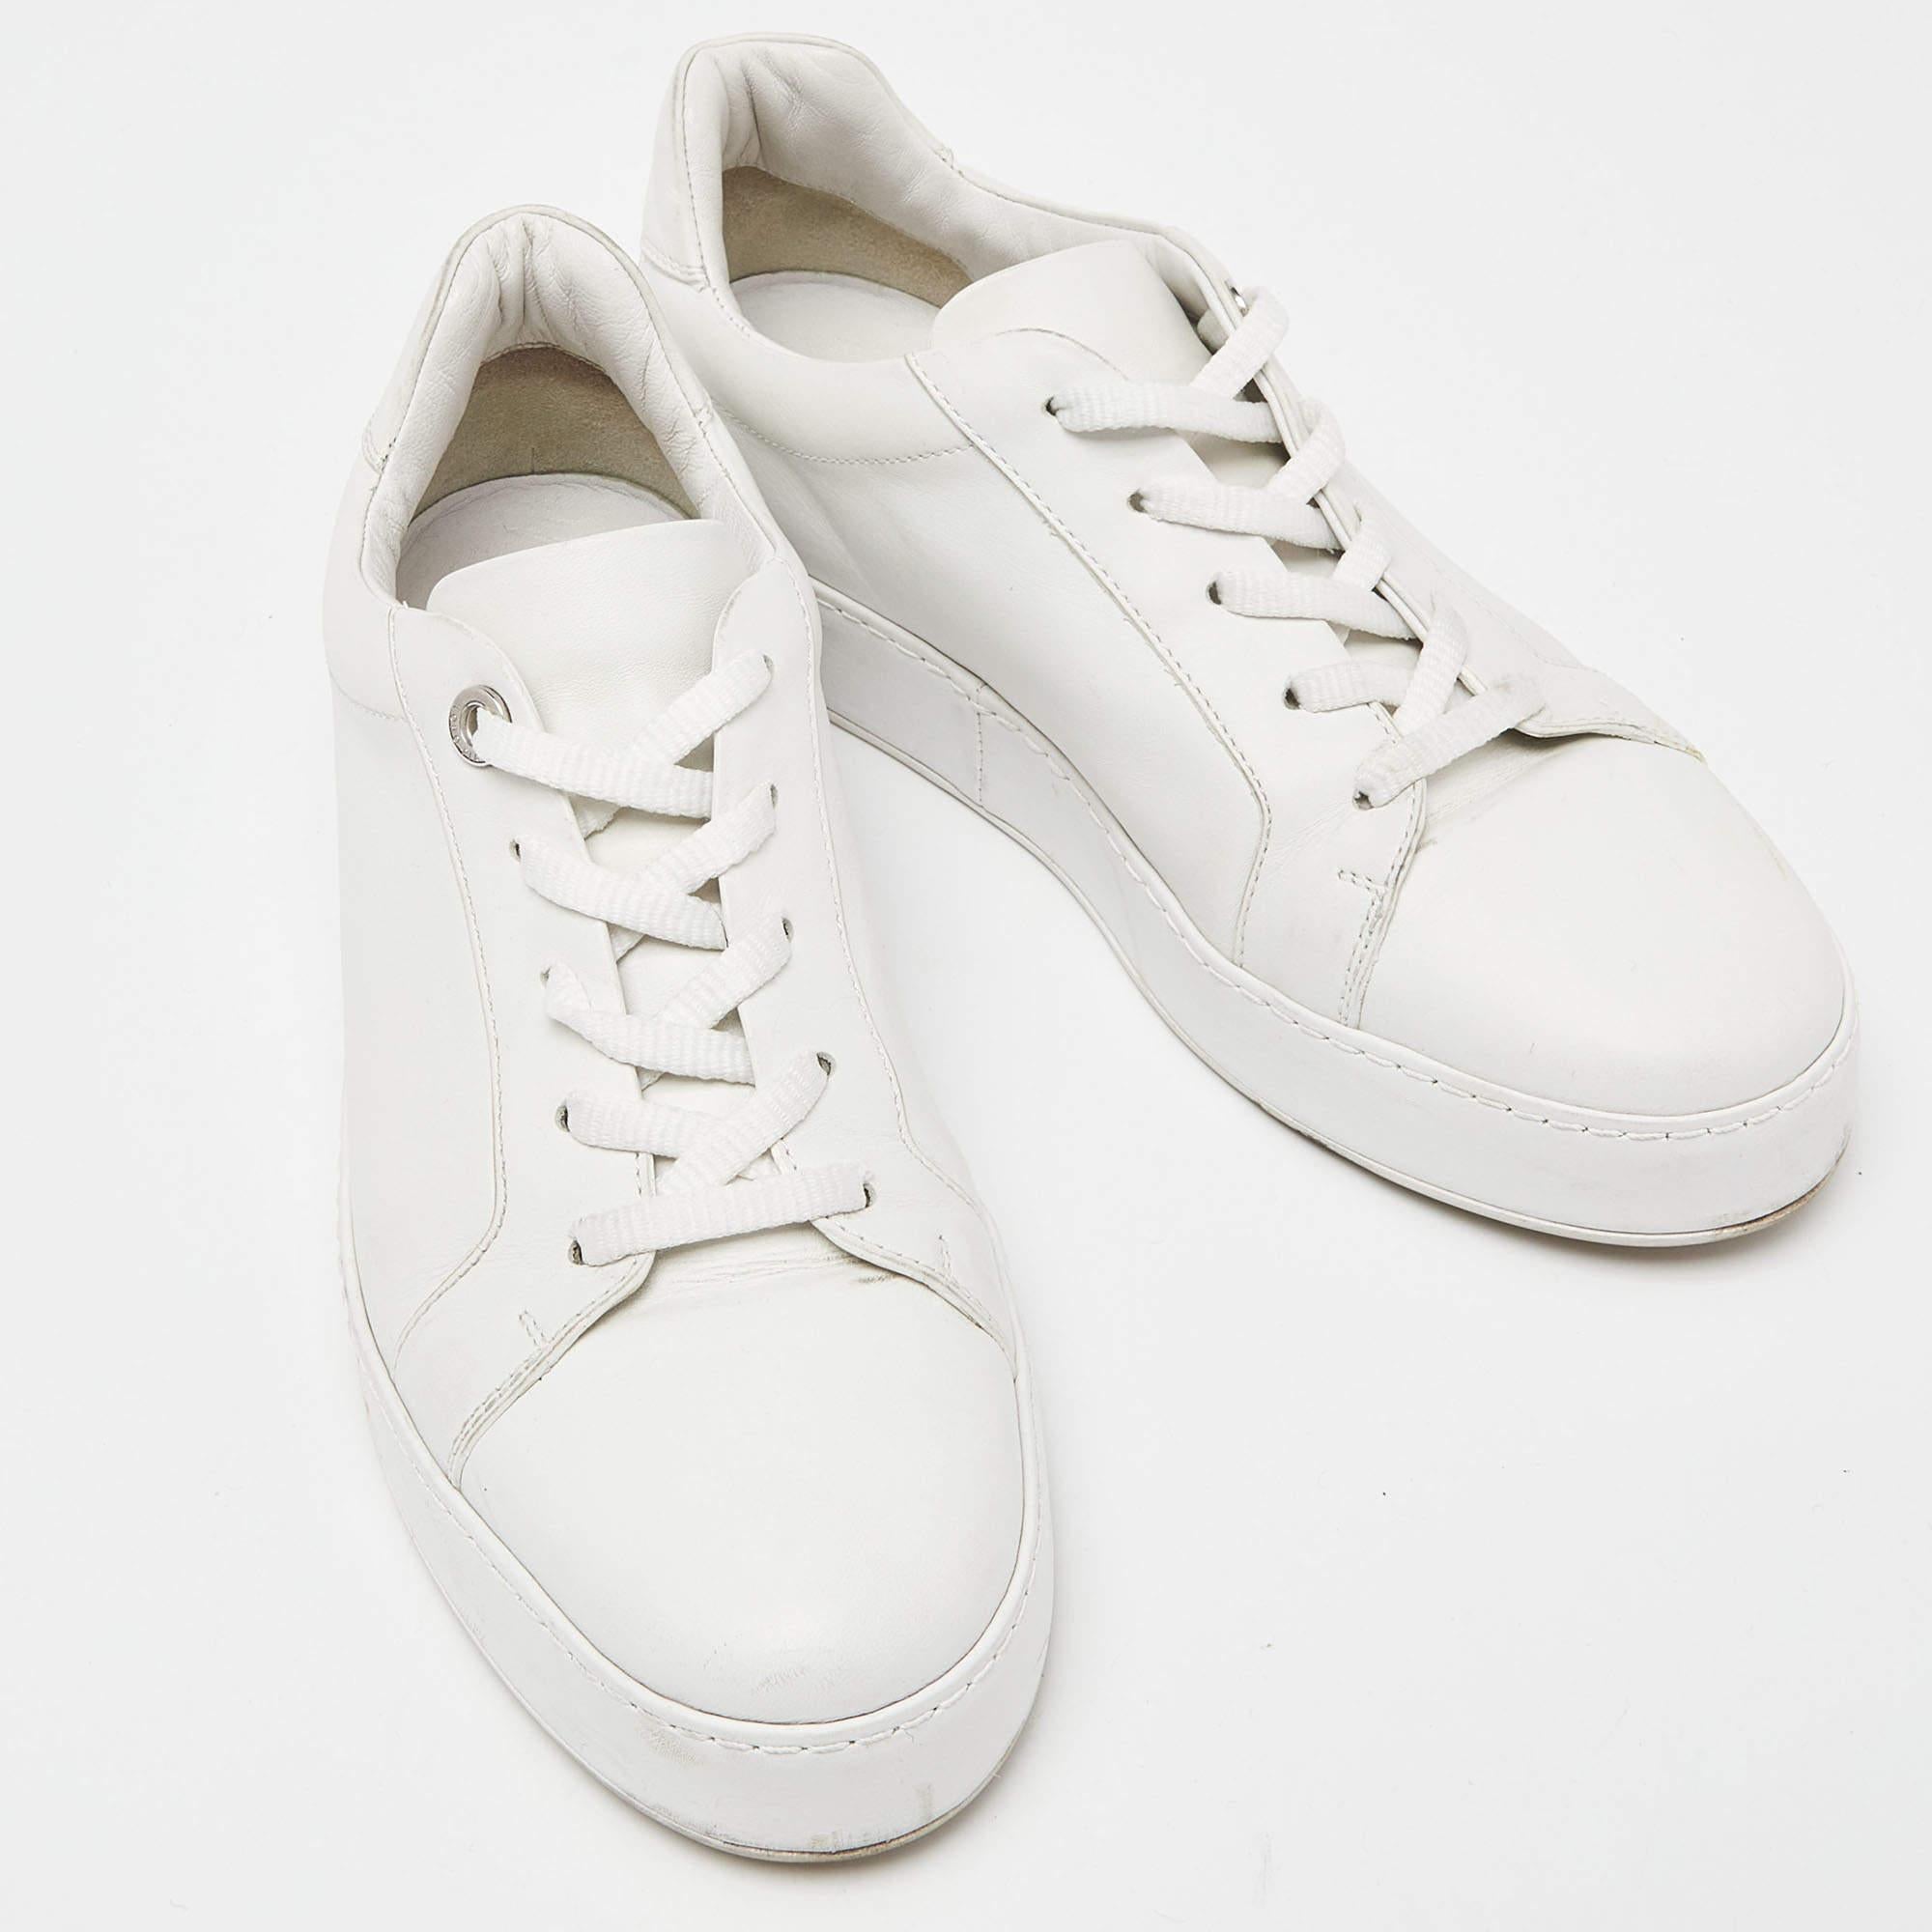 Loro Piana White Leather Nuages Sneakers Size 37.5 1